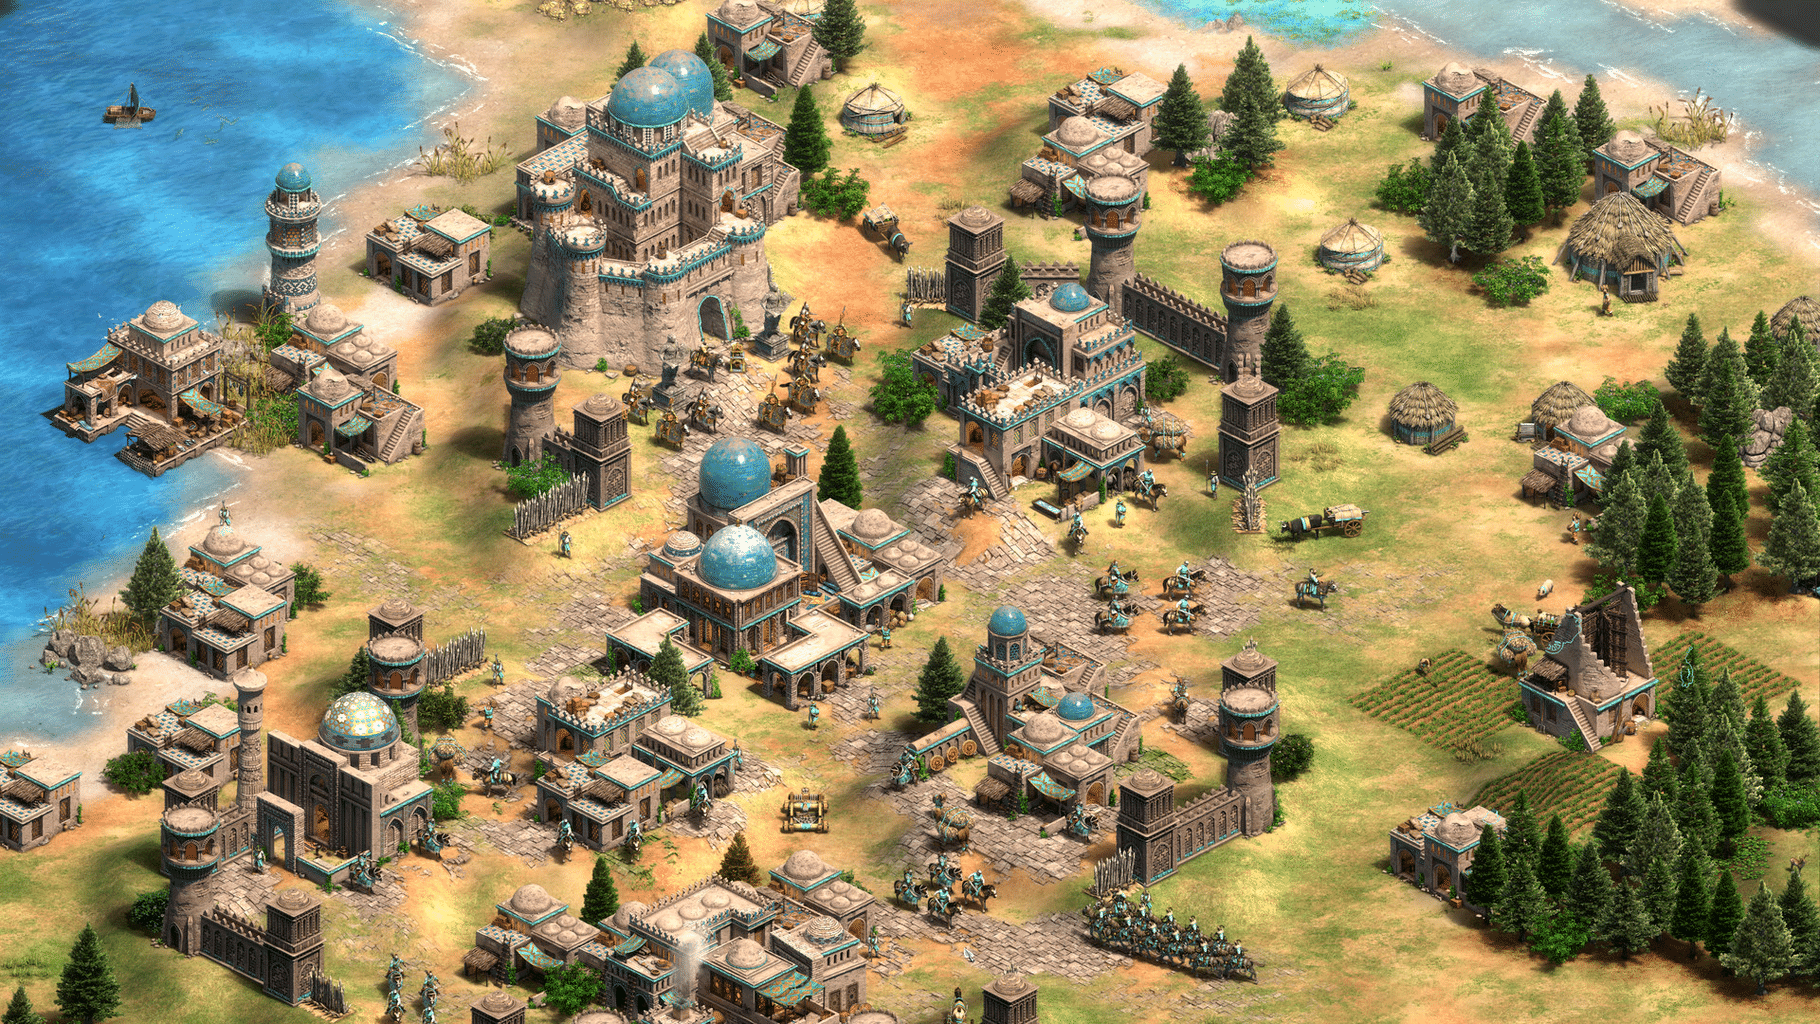 age of empires 3 release date download free